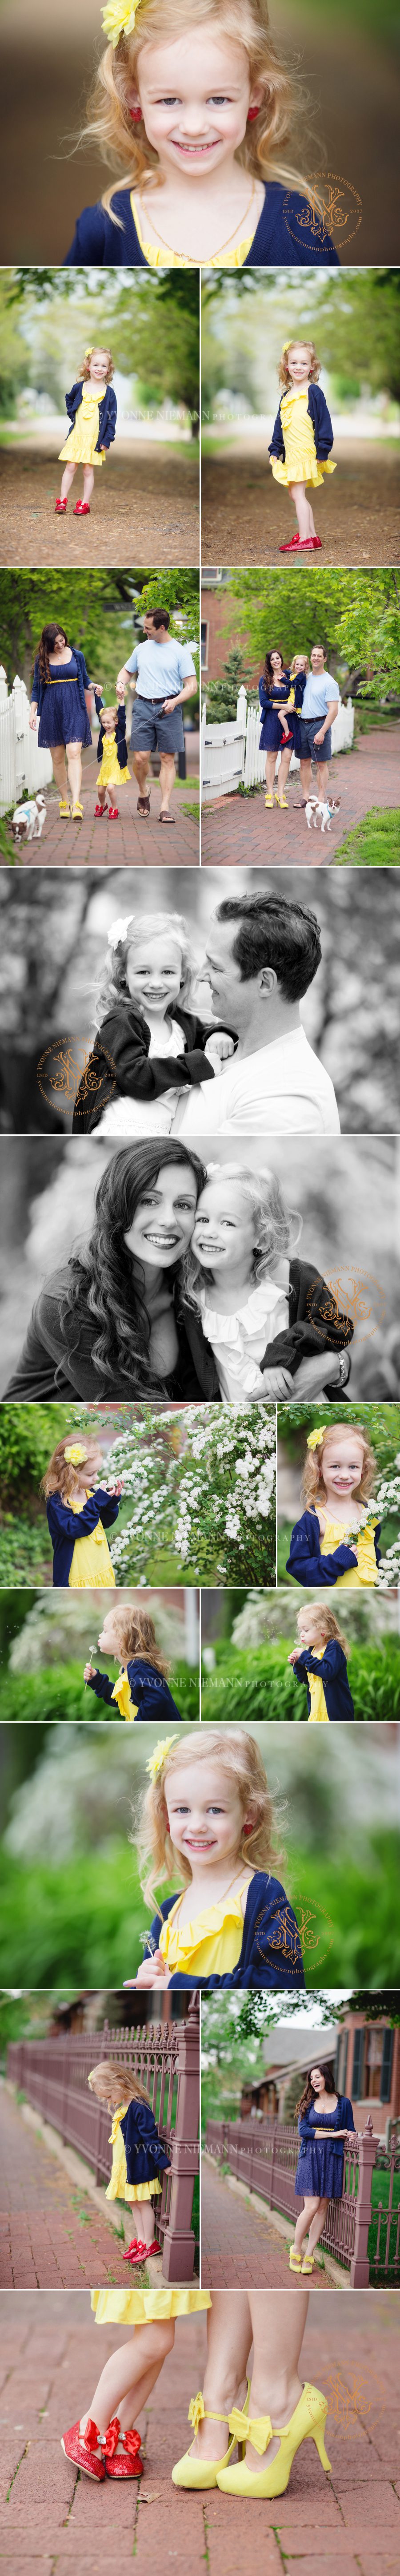 Fun Family Photography in St. Charles by Yvonne Niemann Photography.